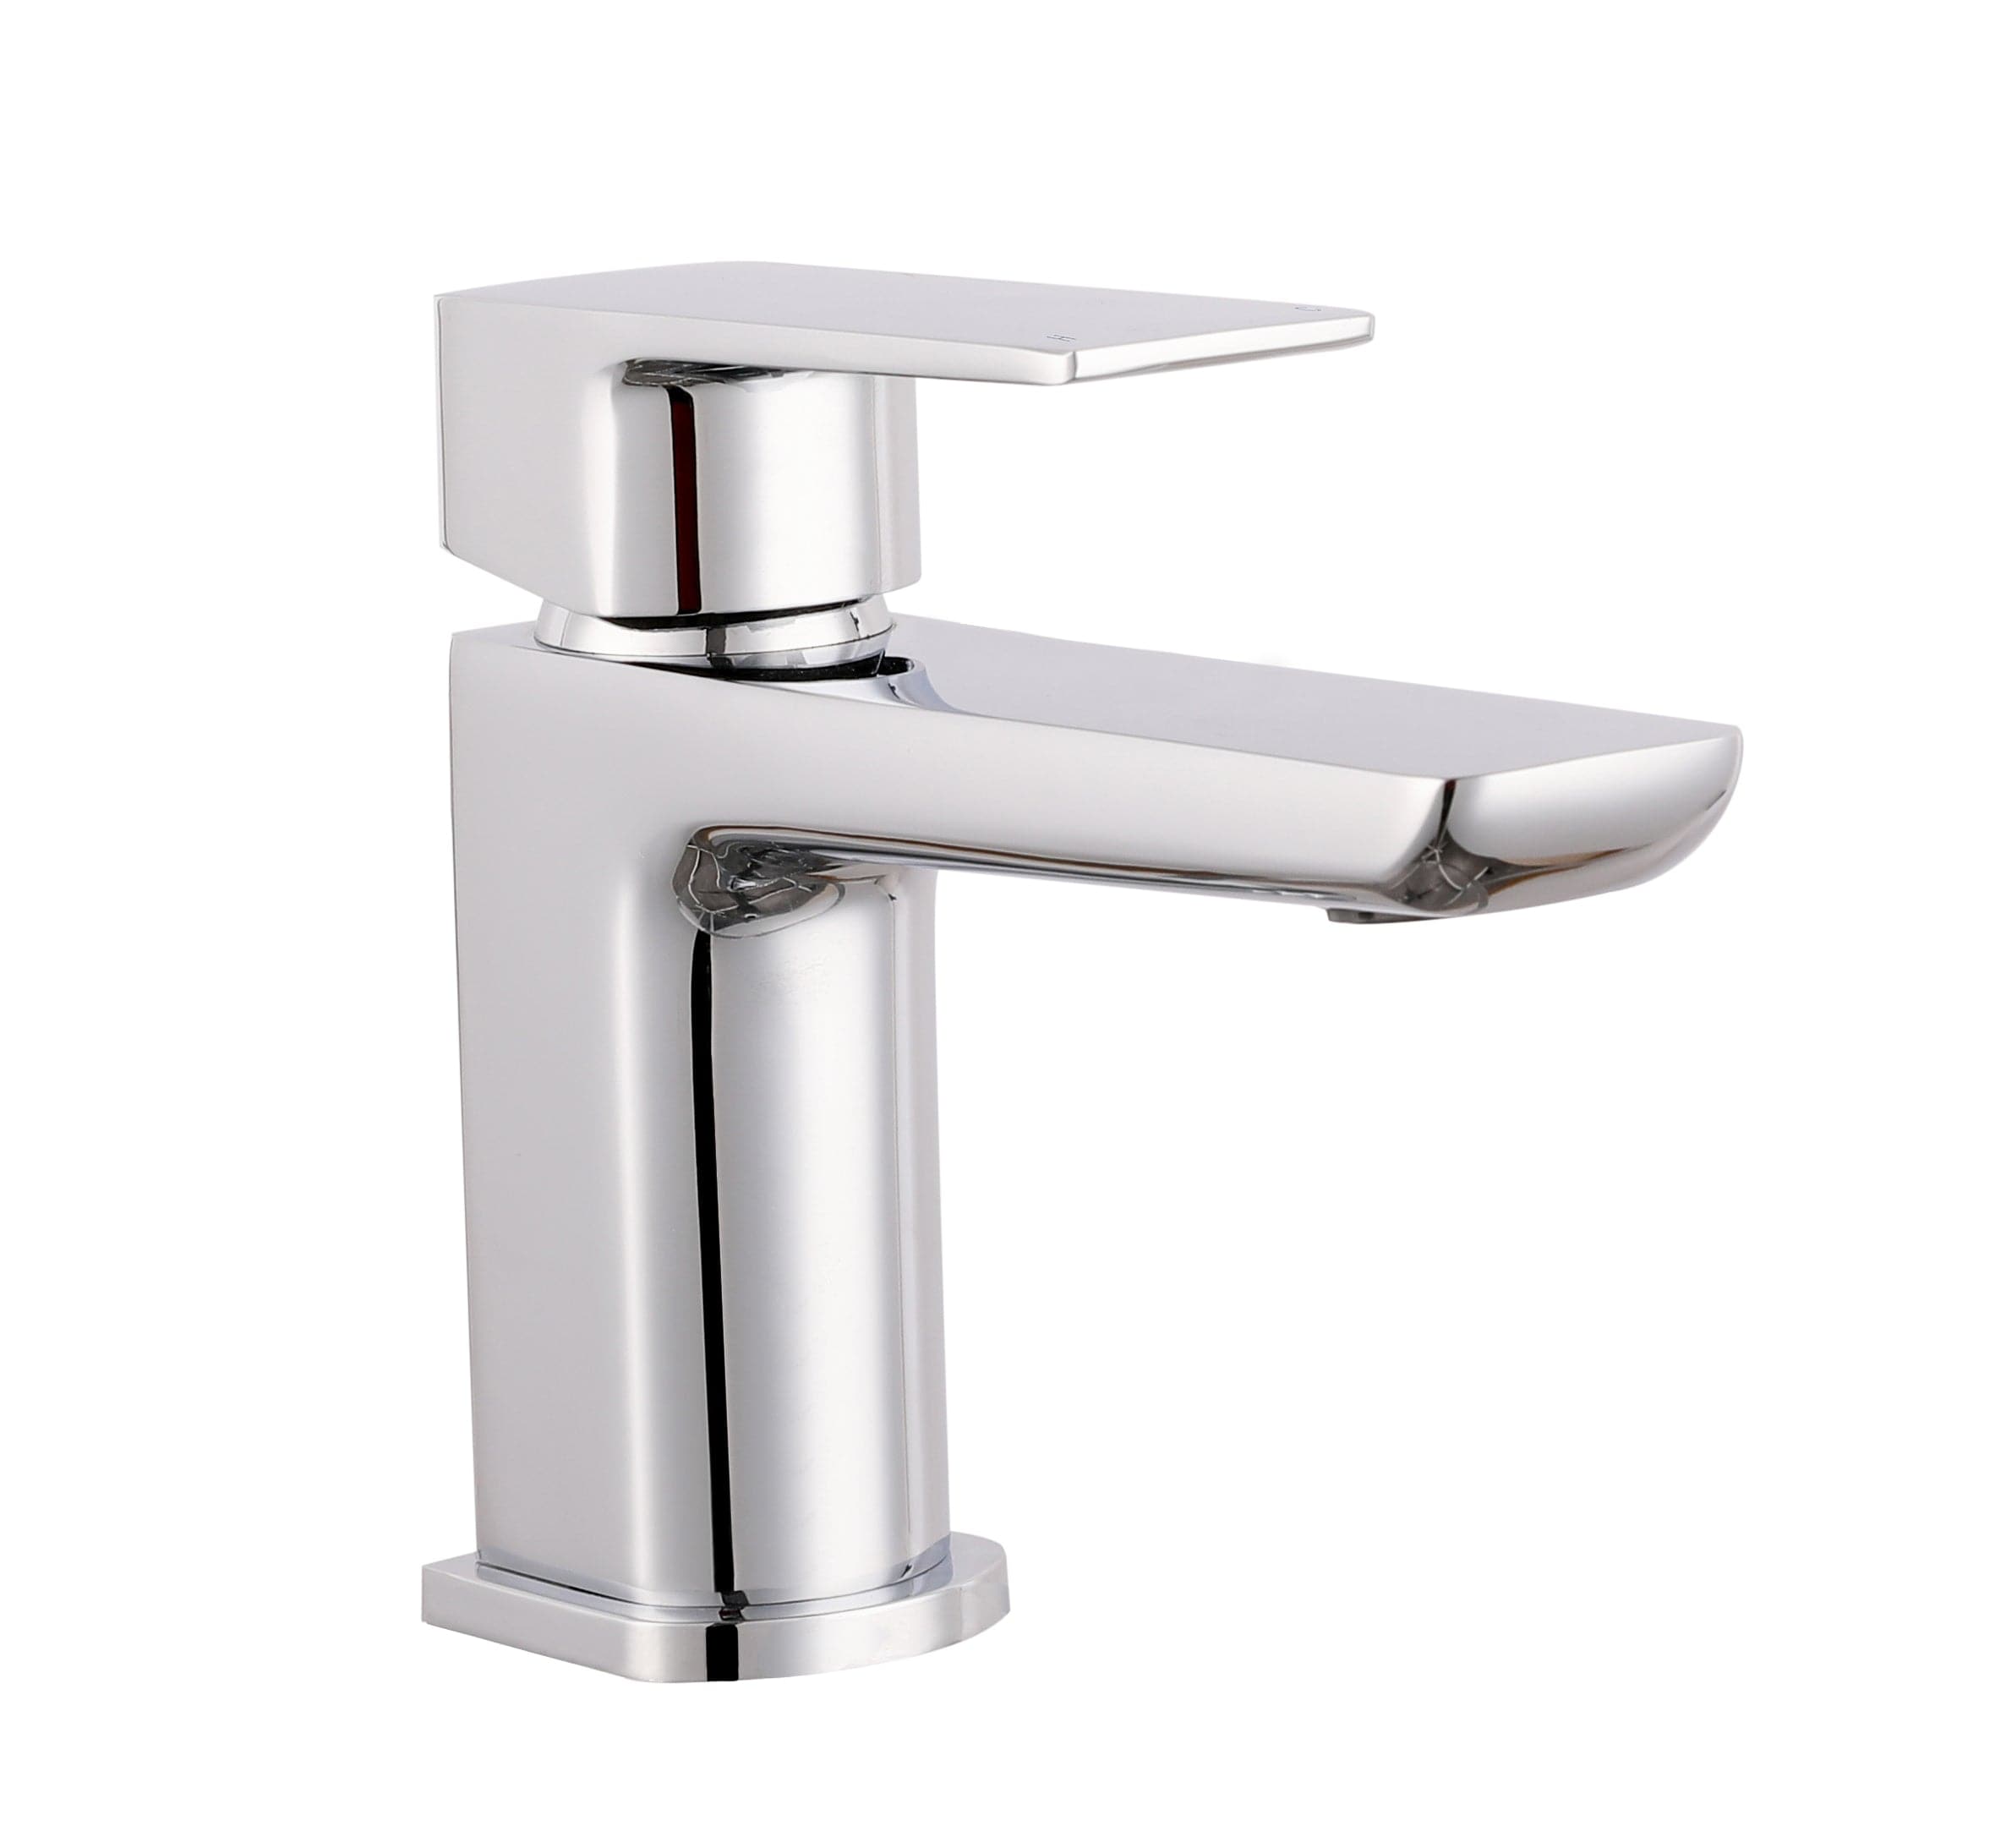 Lunar Soft Square Mono Basin Mixer Tap with Waste - Chrome